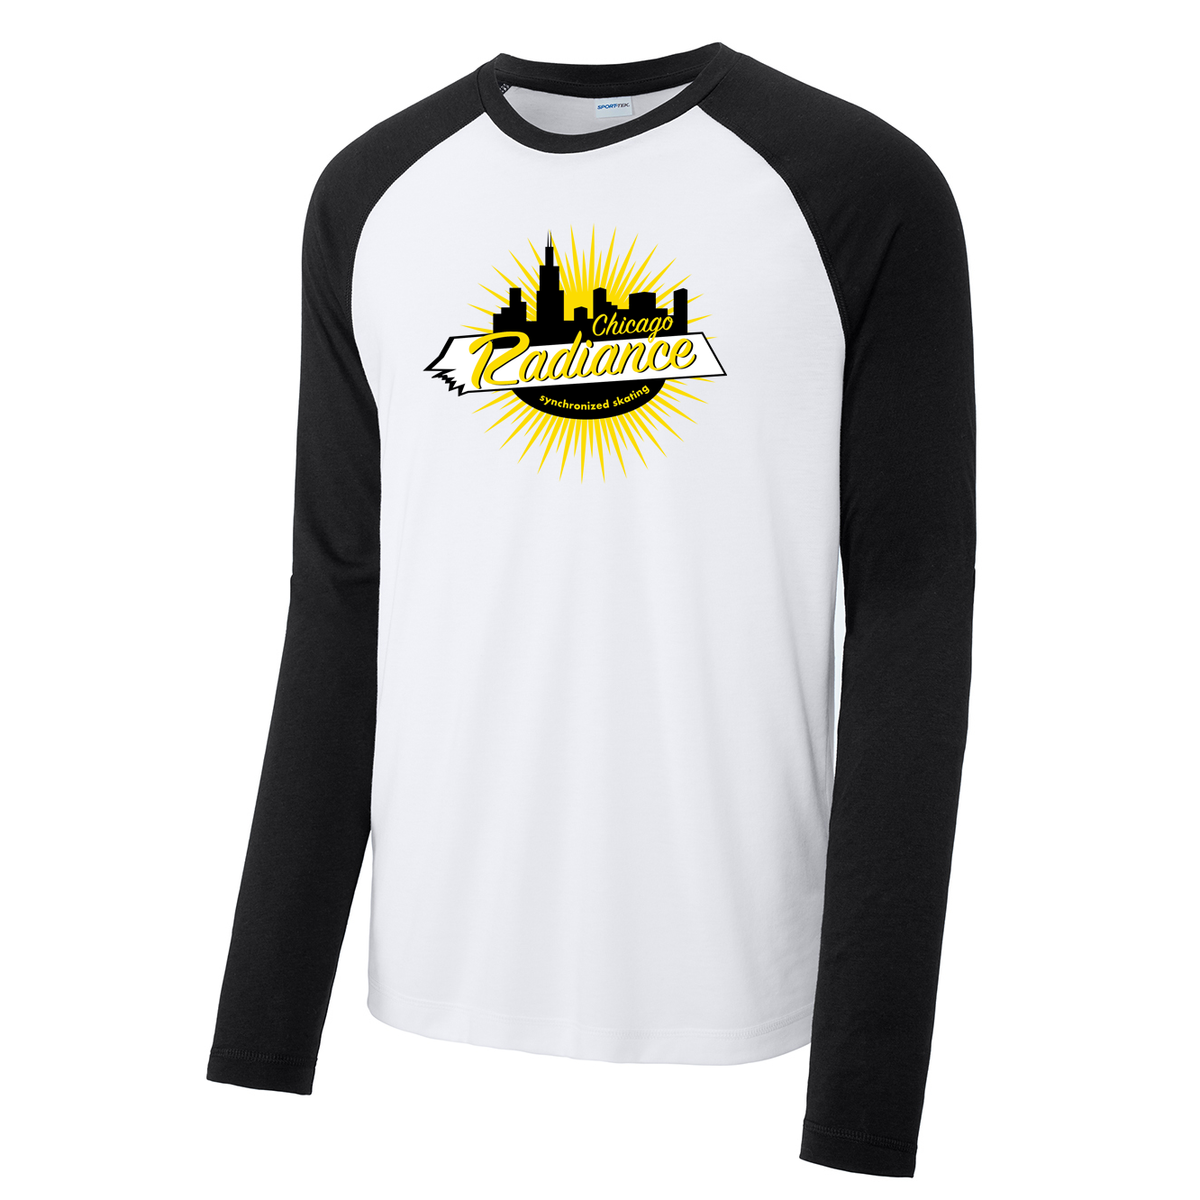 Chicago Radiance Long Sleeve Raglan CottonTouch